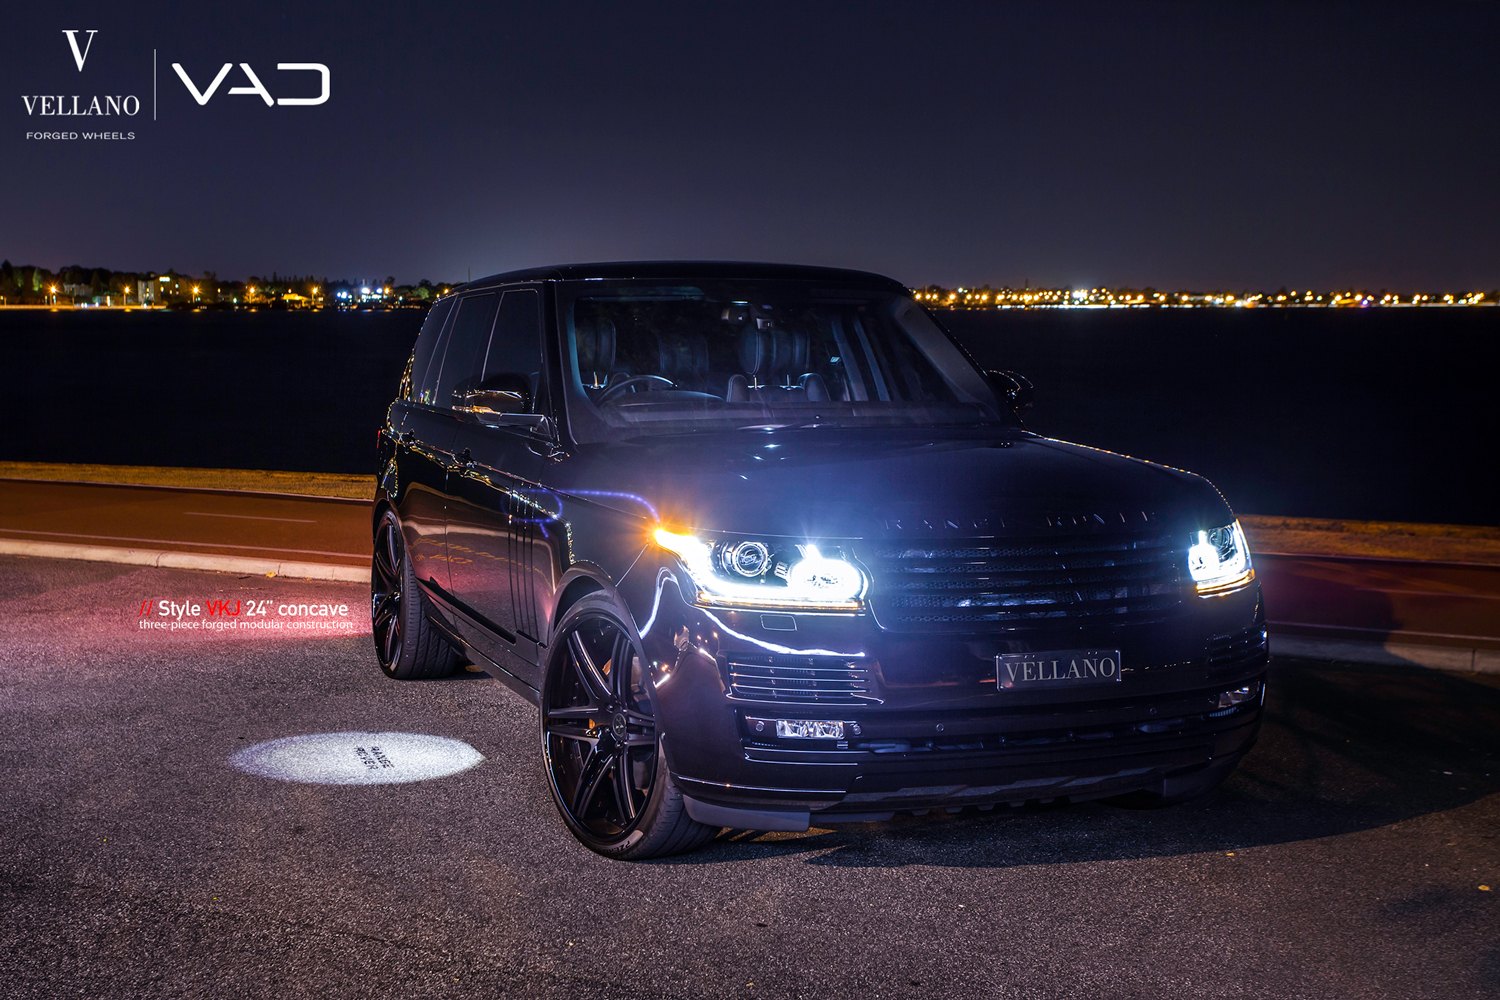 Stylish Transformation of Black Range Rover with LED Lighting and VKJ  Vellano Wheels —  Gallery